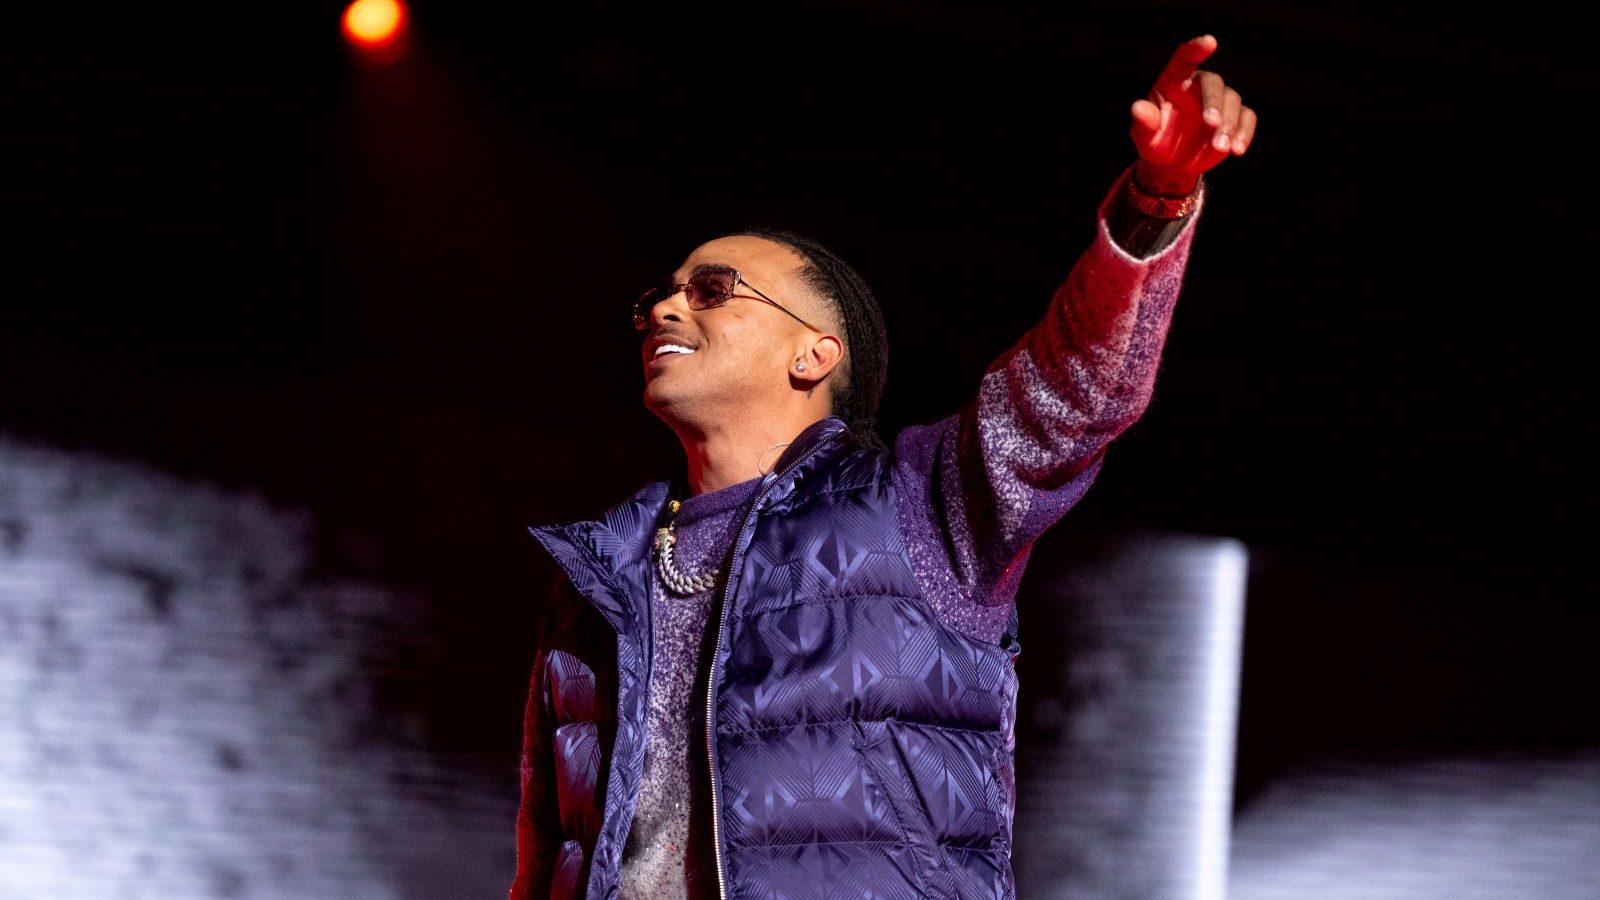 J Balvin, Bad Bunny and Ozuna: The Artist with more videos in the Billion Views Club on YouTube